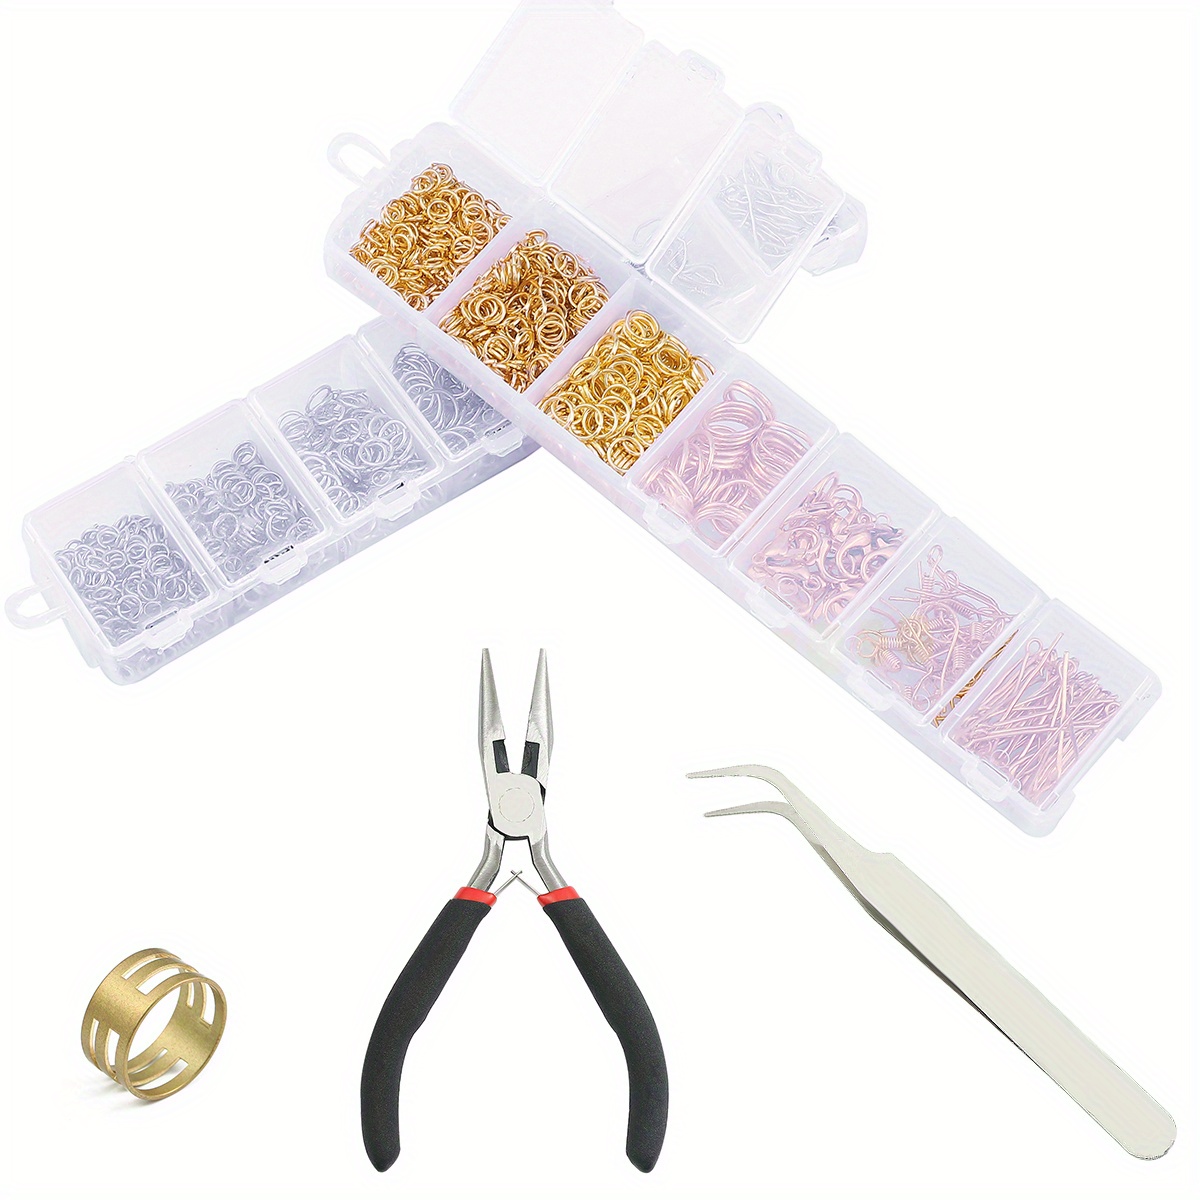 Jewelry Making Kit Jewelry Findings Starter Kit, TSV 905pcs Gold Jewelry  Beading Repair Tools Kit for Necklace Making, Including Lobster Clasps